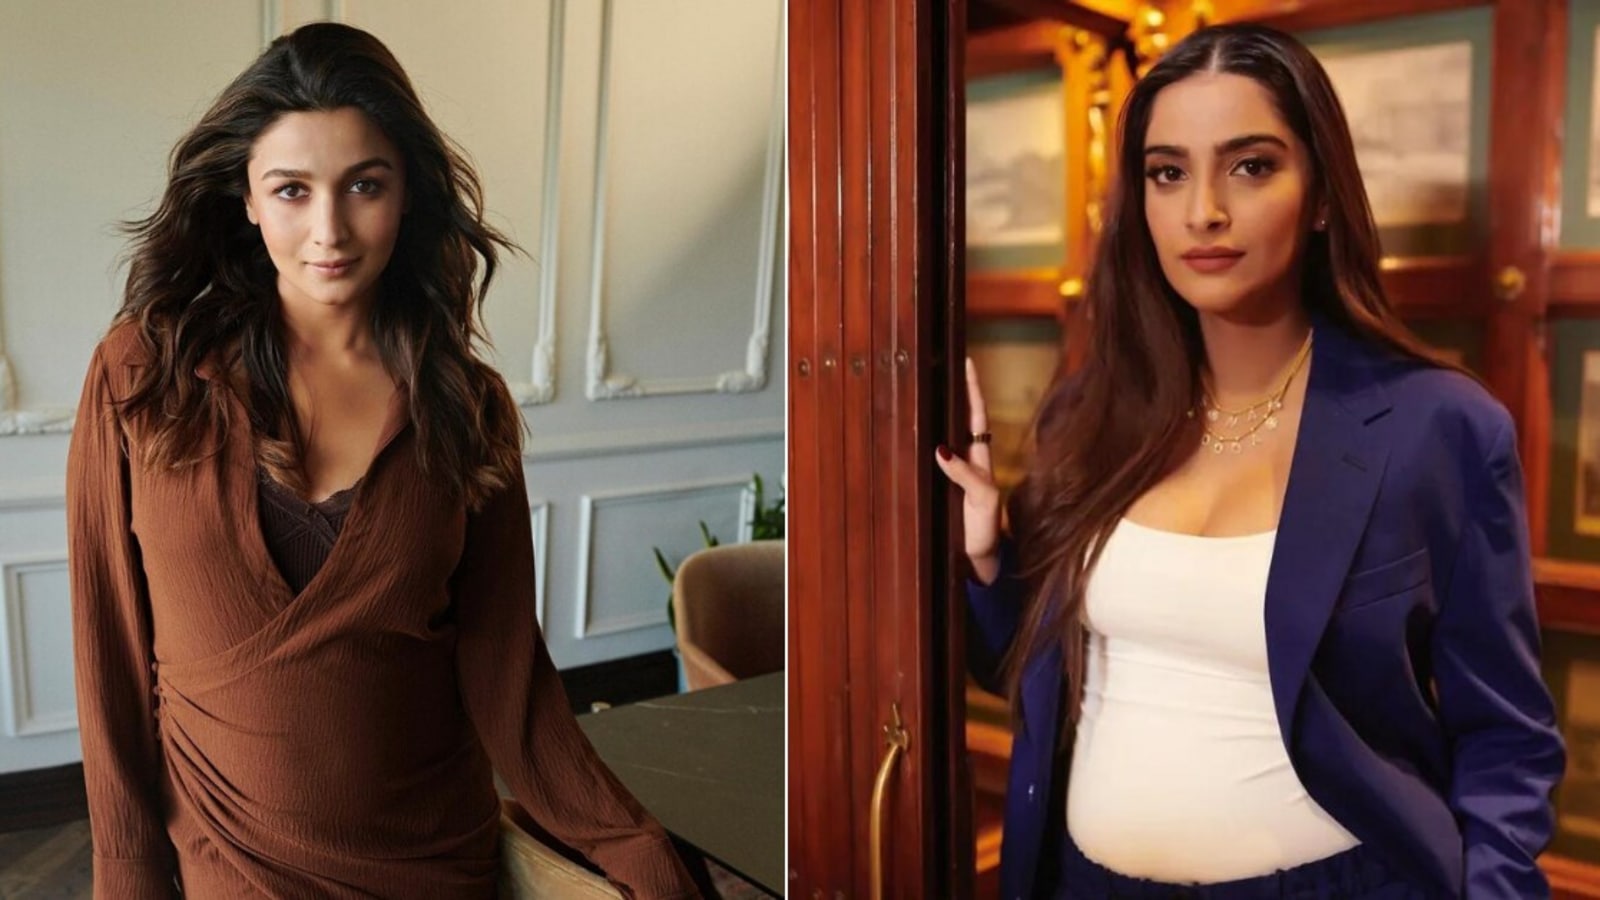 Alia Bhatt shares pic from her babymoon in Italy, pregnant Sonam Kapoor says ‘I went there too’. See pic